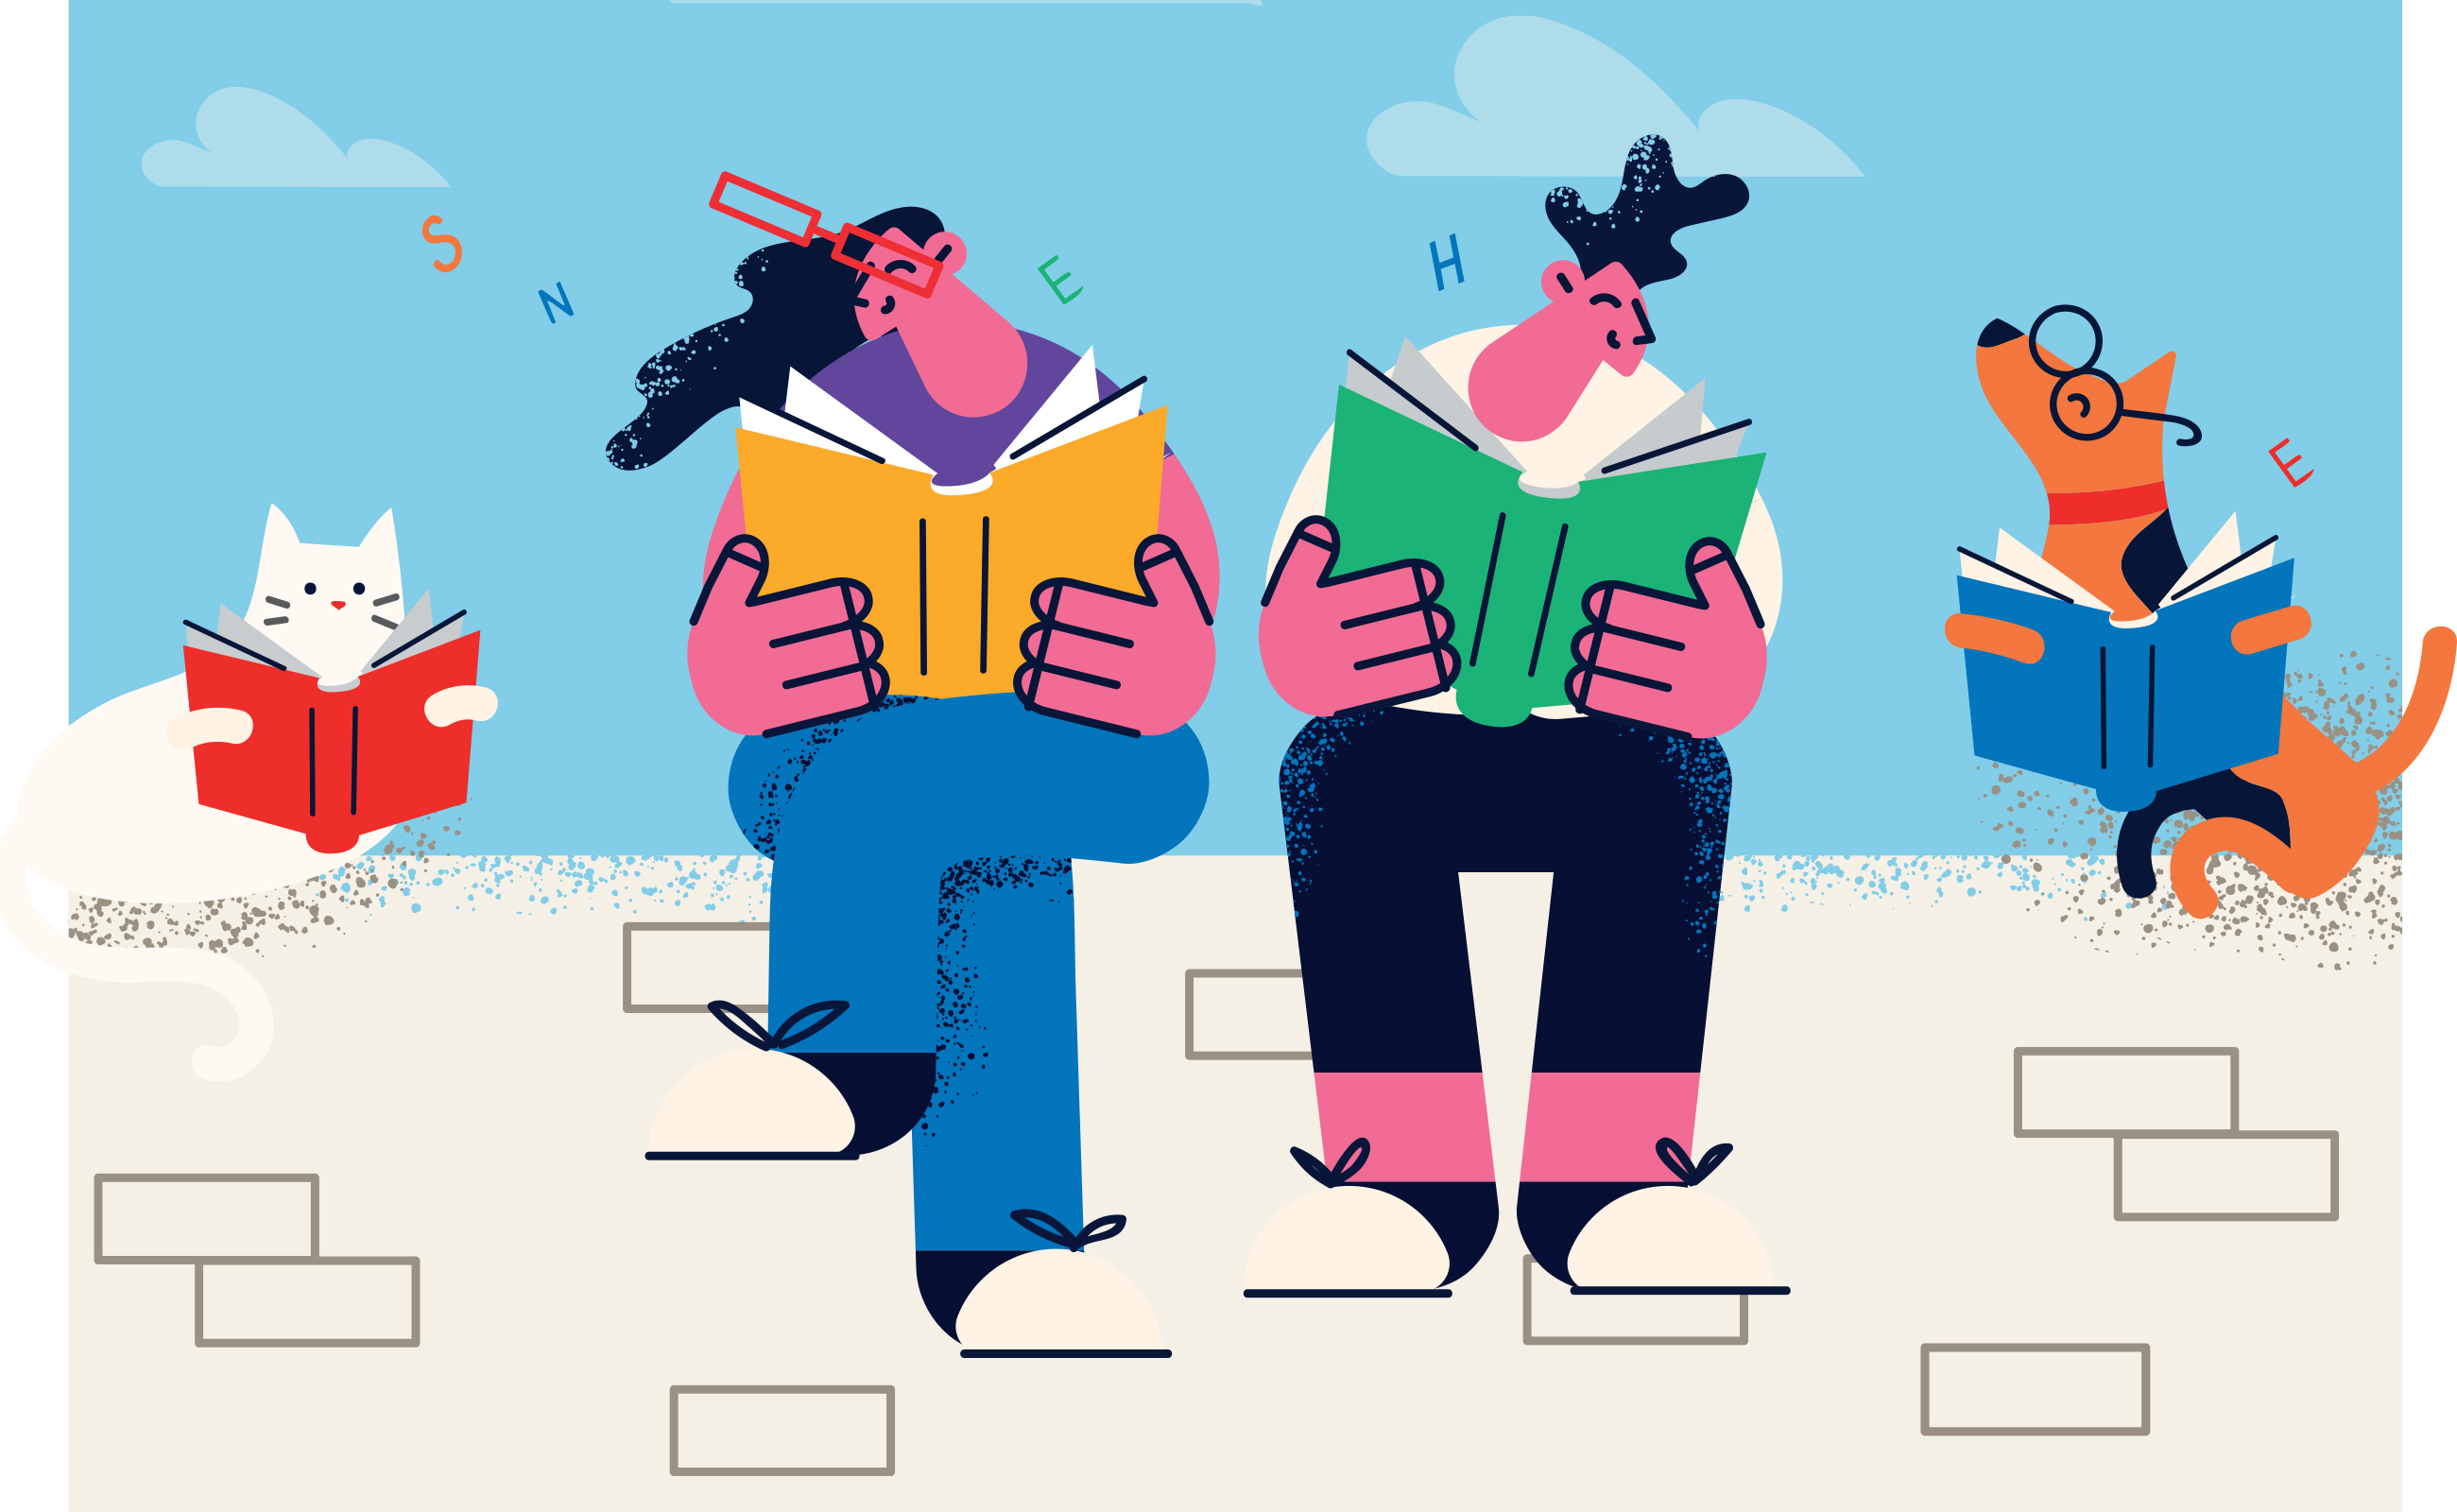 What We're Reading with Our Kids This Summer | The New Yorker